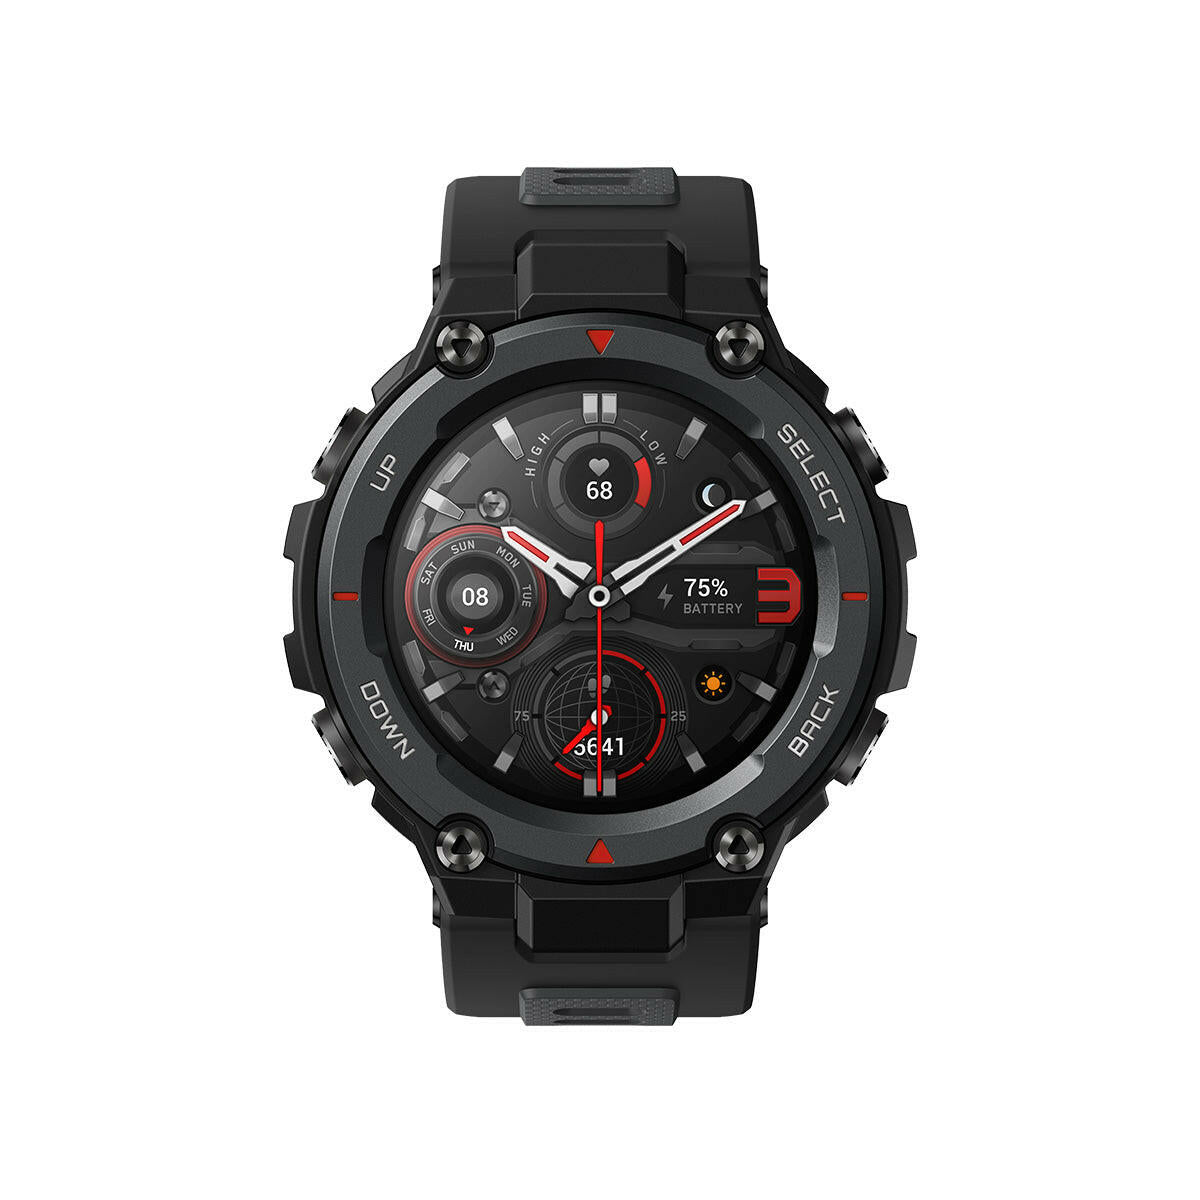 Amazfit T-Rex Pro with 15 Military Grade Certifications, 10 ATM Water Resistance and QUAD GPS - Amazfit India